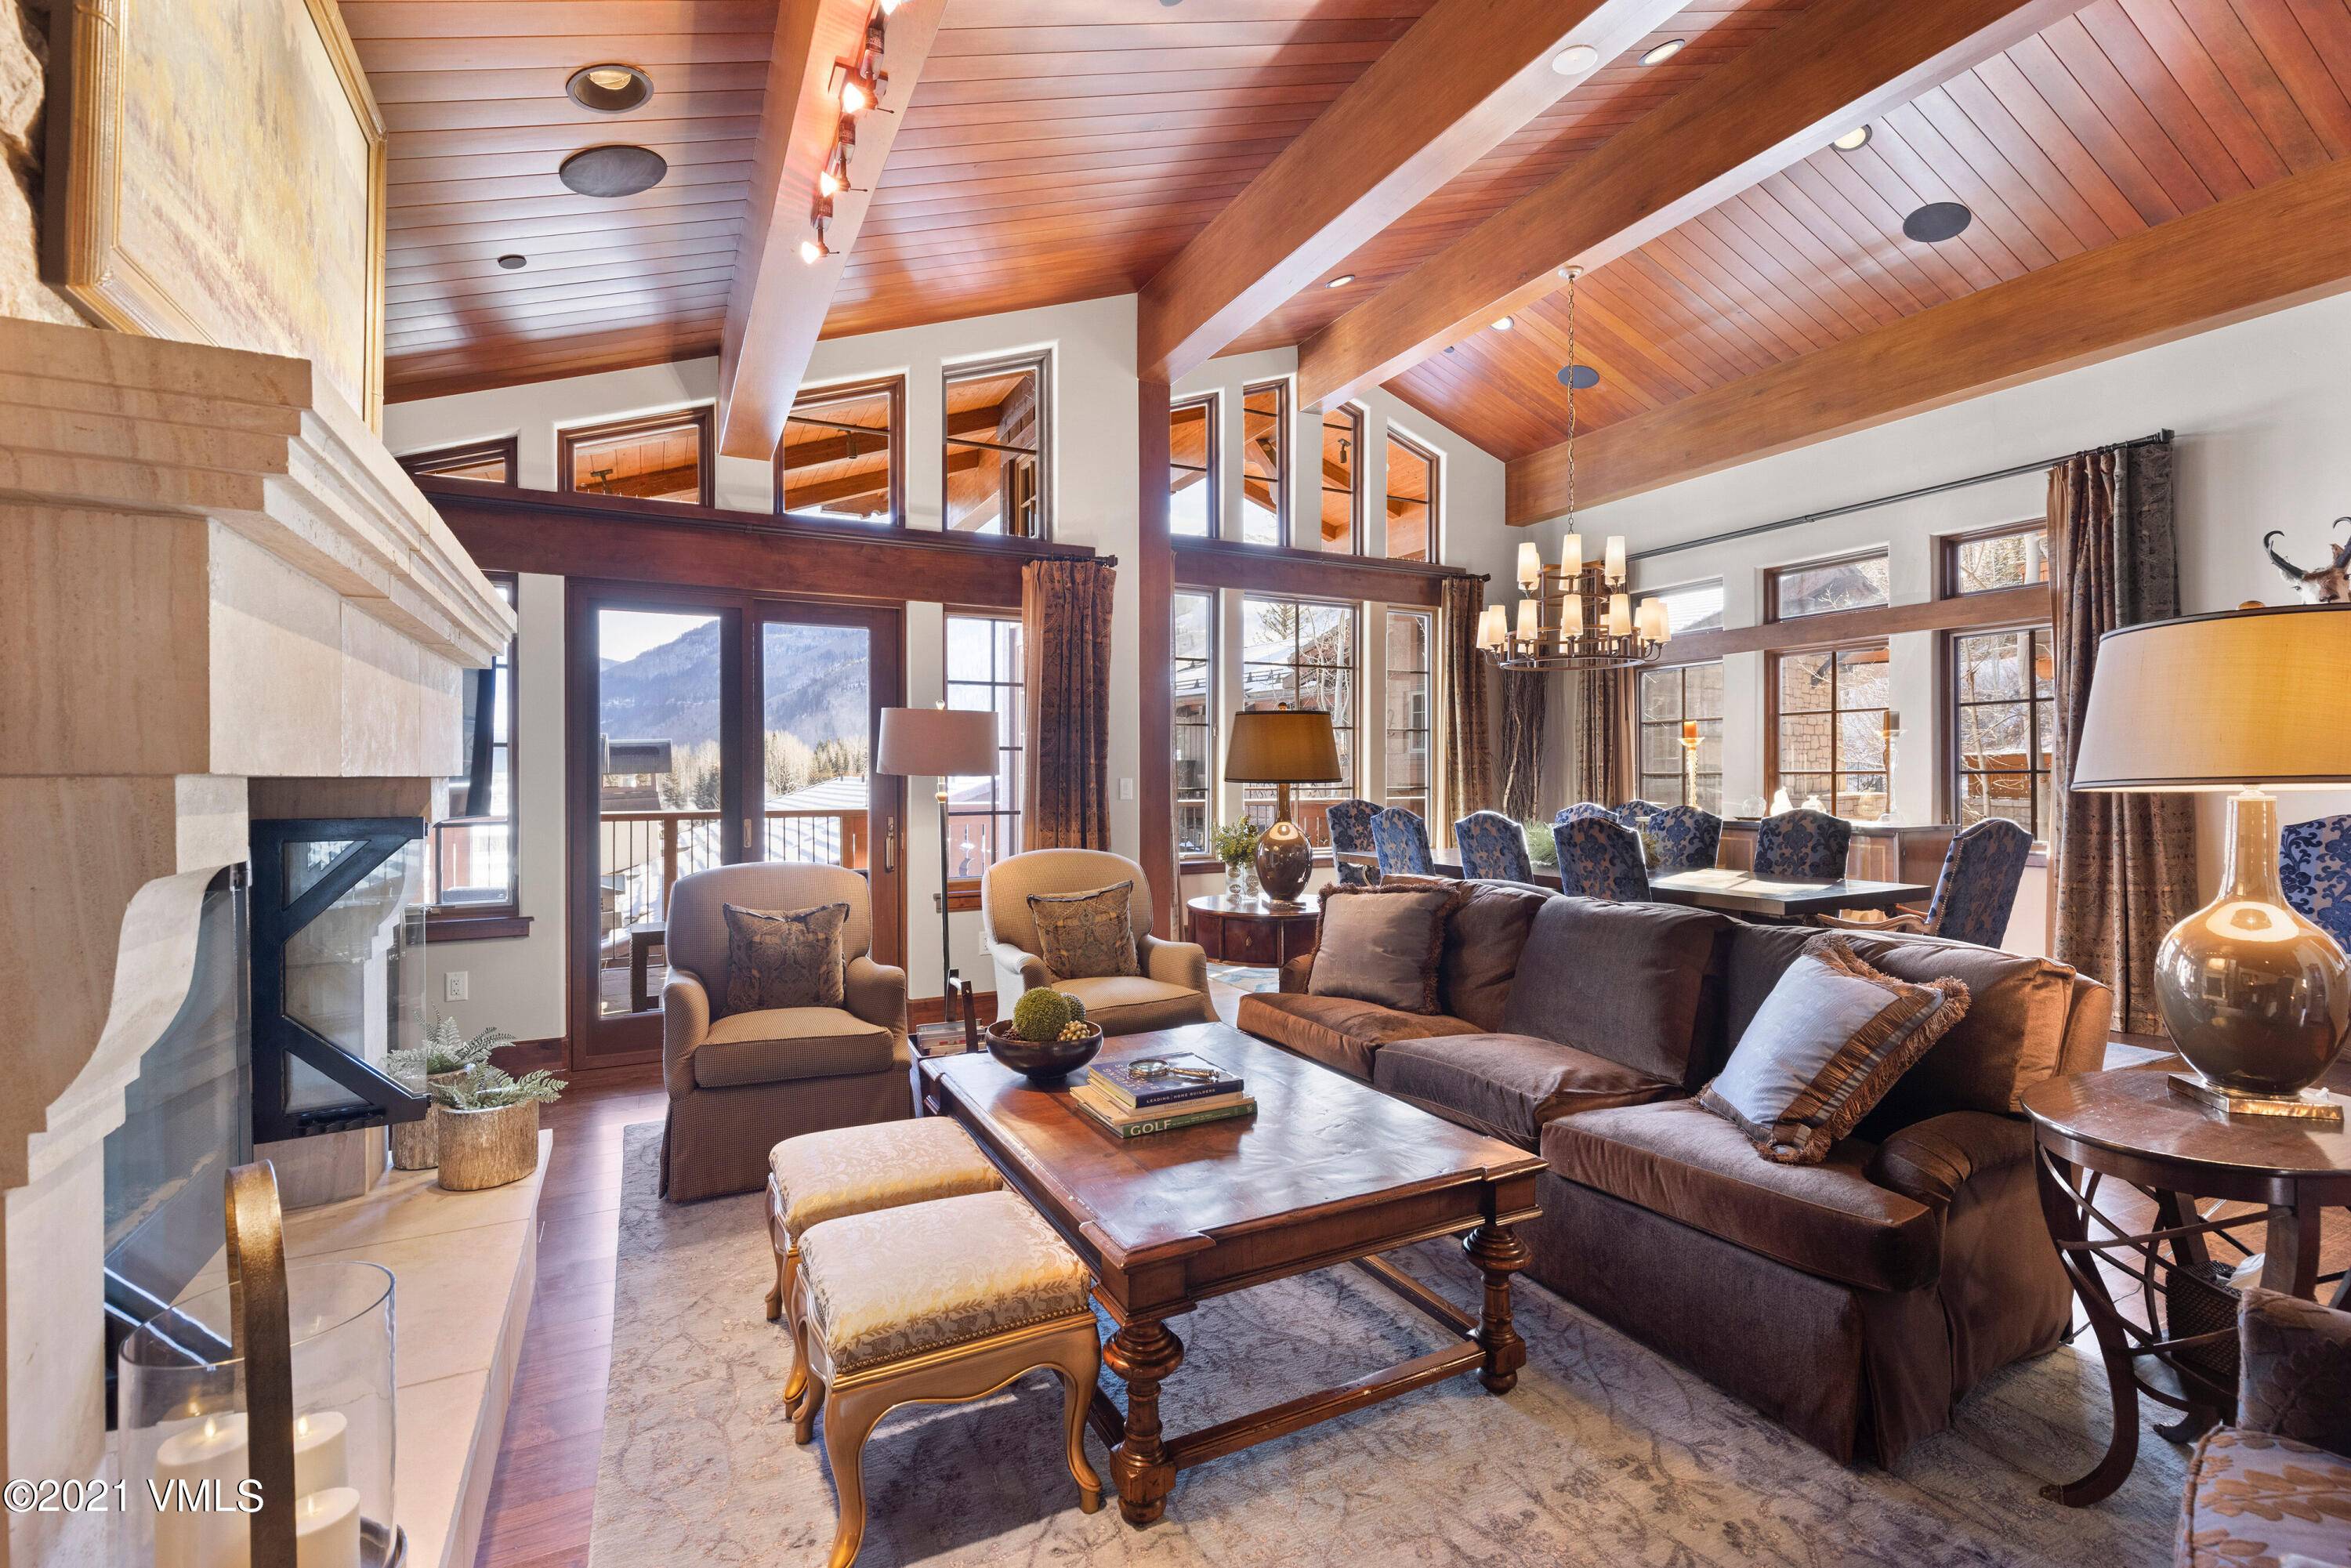 Welcome to The Lodge at Vail Chalets 2, one of the most sought after properties in the Vail Village.